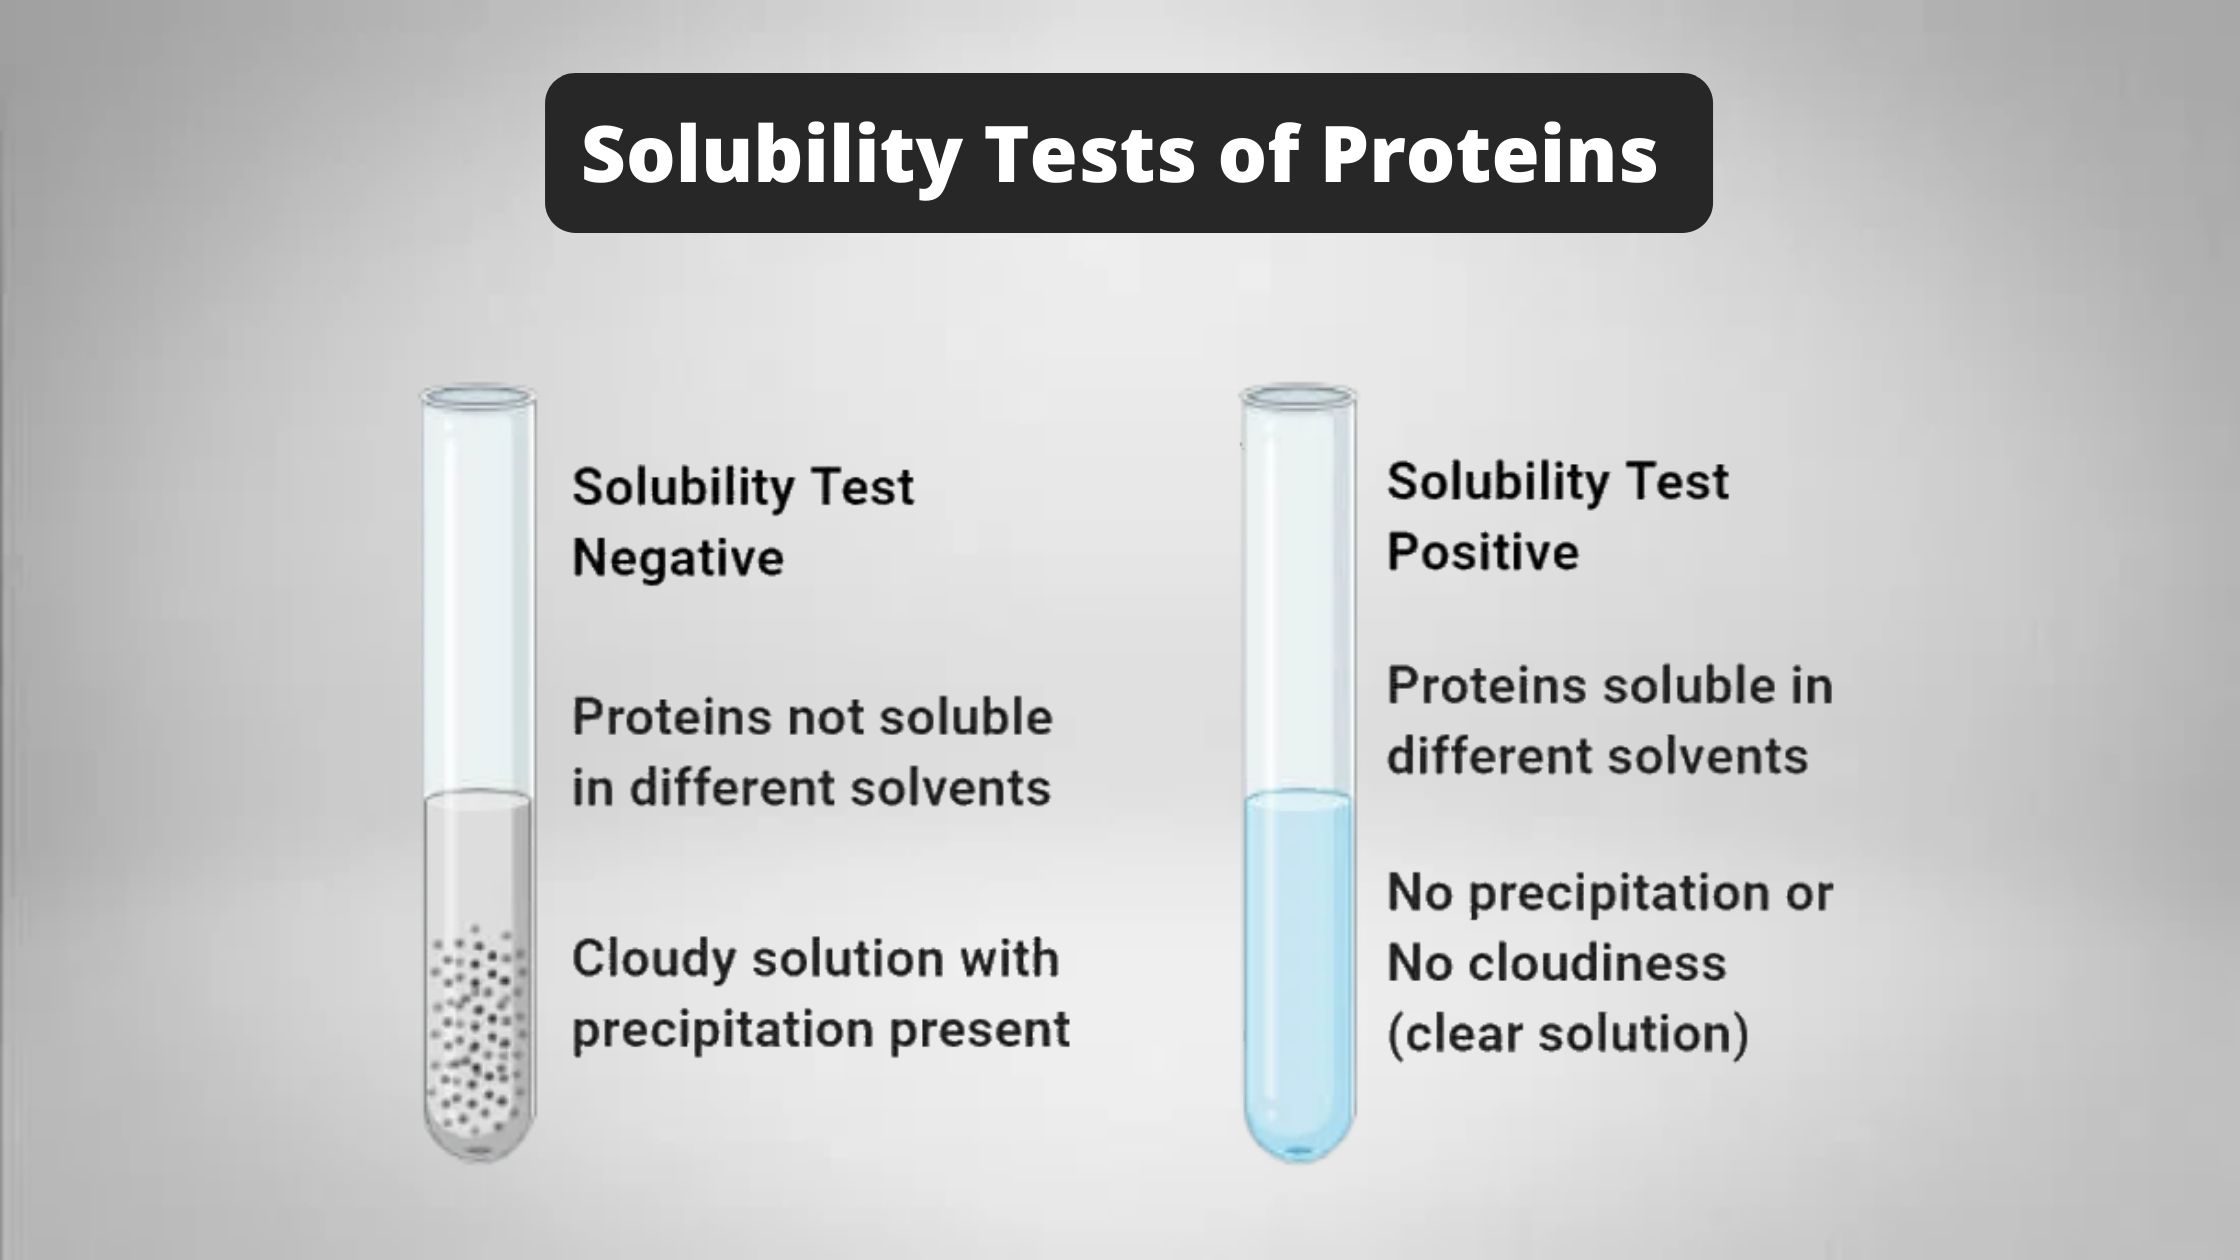 Solubility Tests of Proteins Principle, Procedure, Result, Application